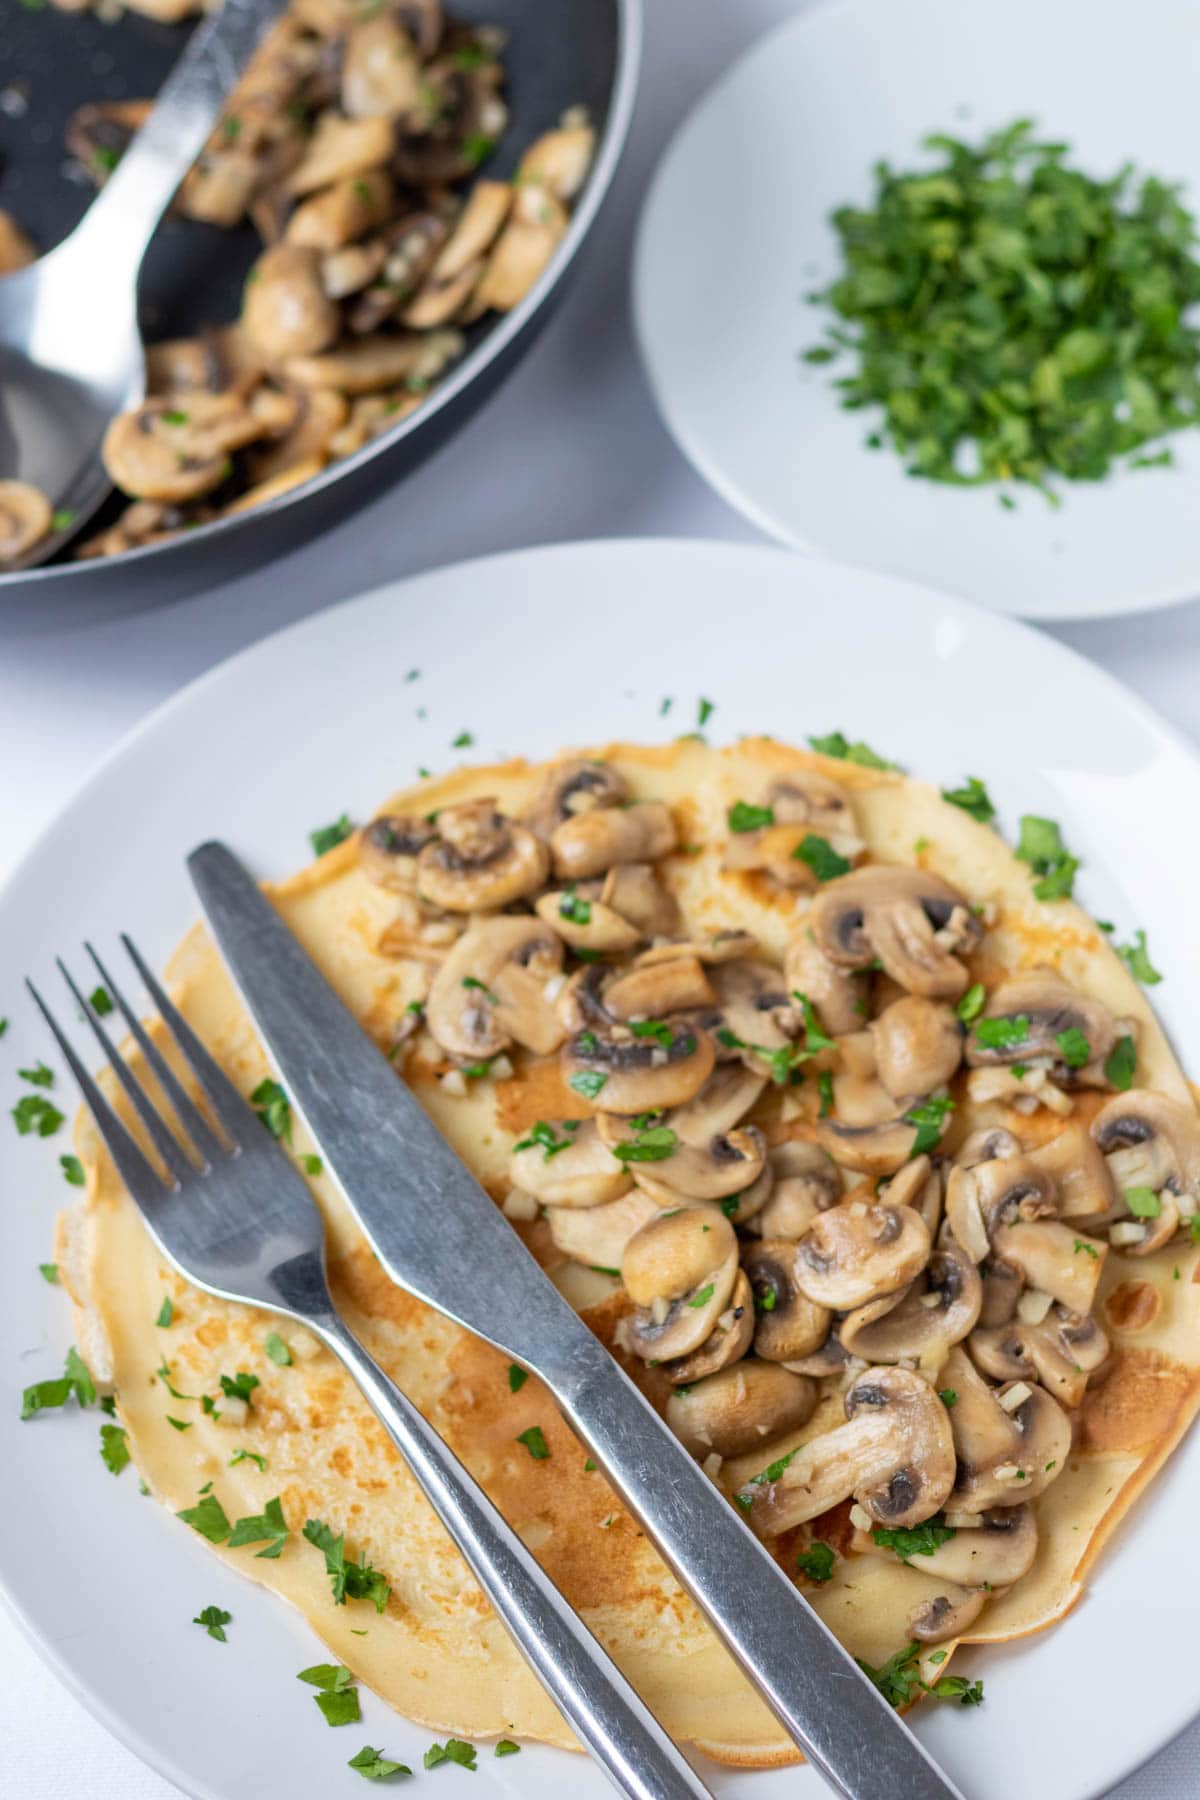 Savoury mushroom pancakes recipe served on a plate with a knife and fork. Dish of chopped parsley and frying pan of sauted mushrooms and garlic in the background.